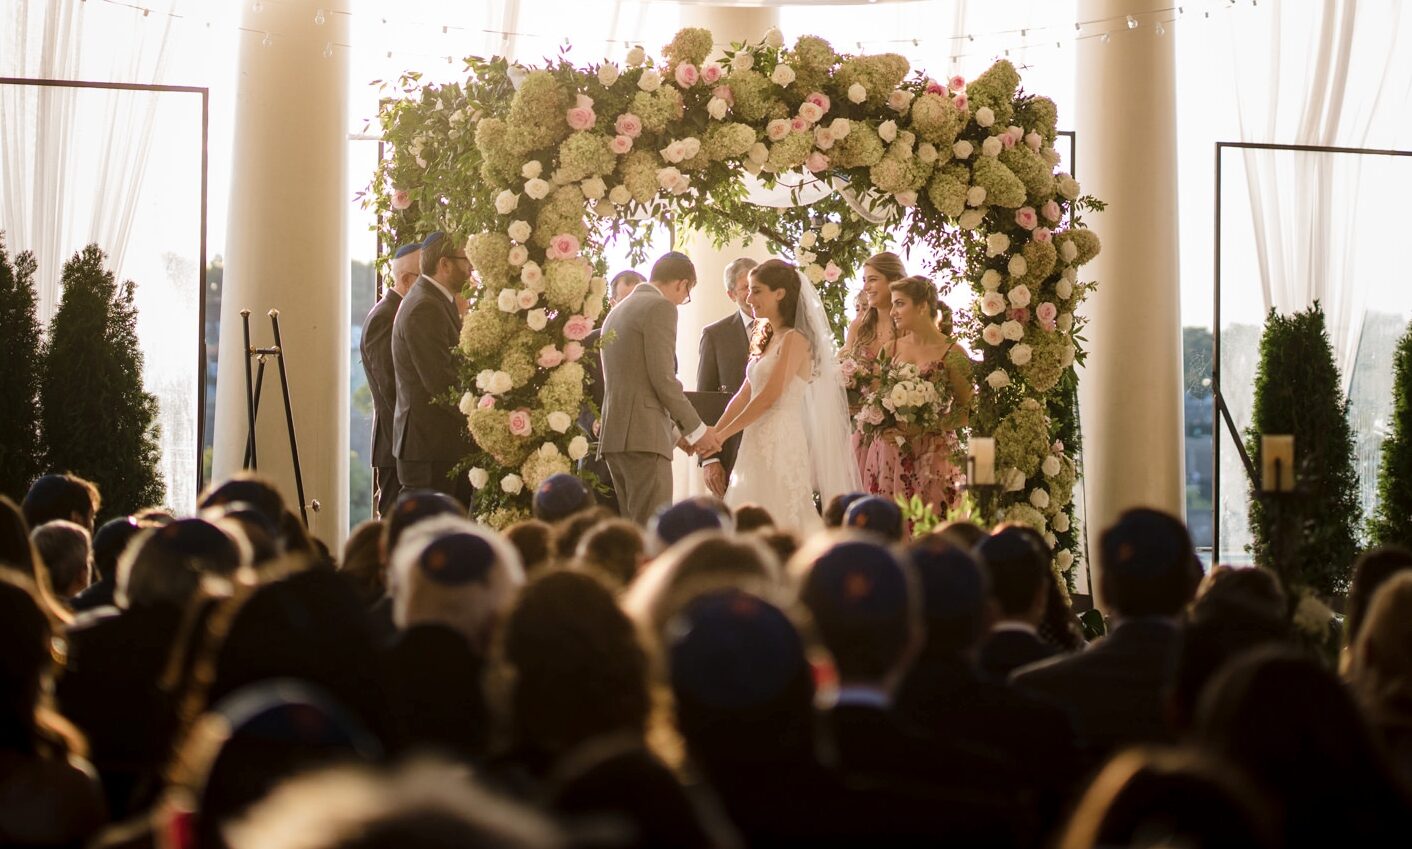 A Water Works Philadelphia wedding ceremony in a large room with a floral arch, bride and groom facing an officiant, and guests seated in the foreground.